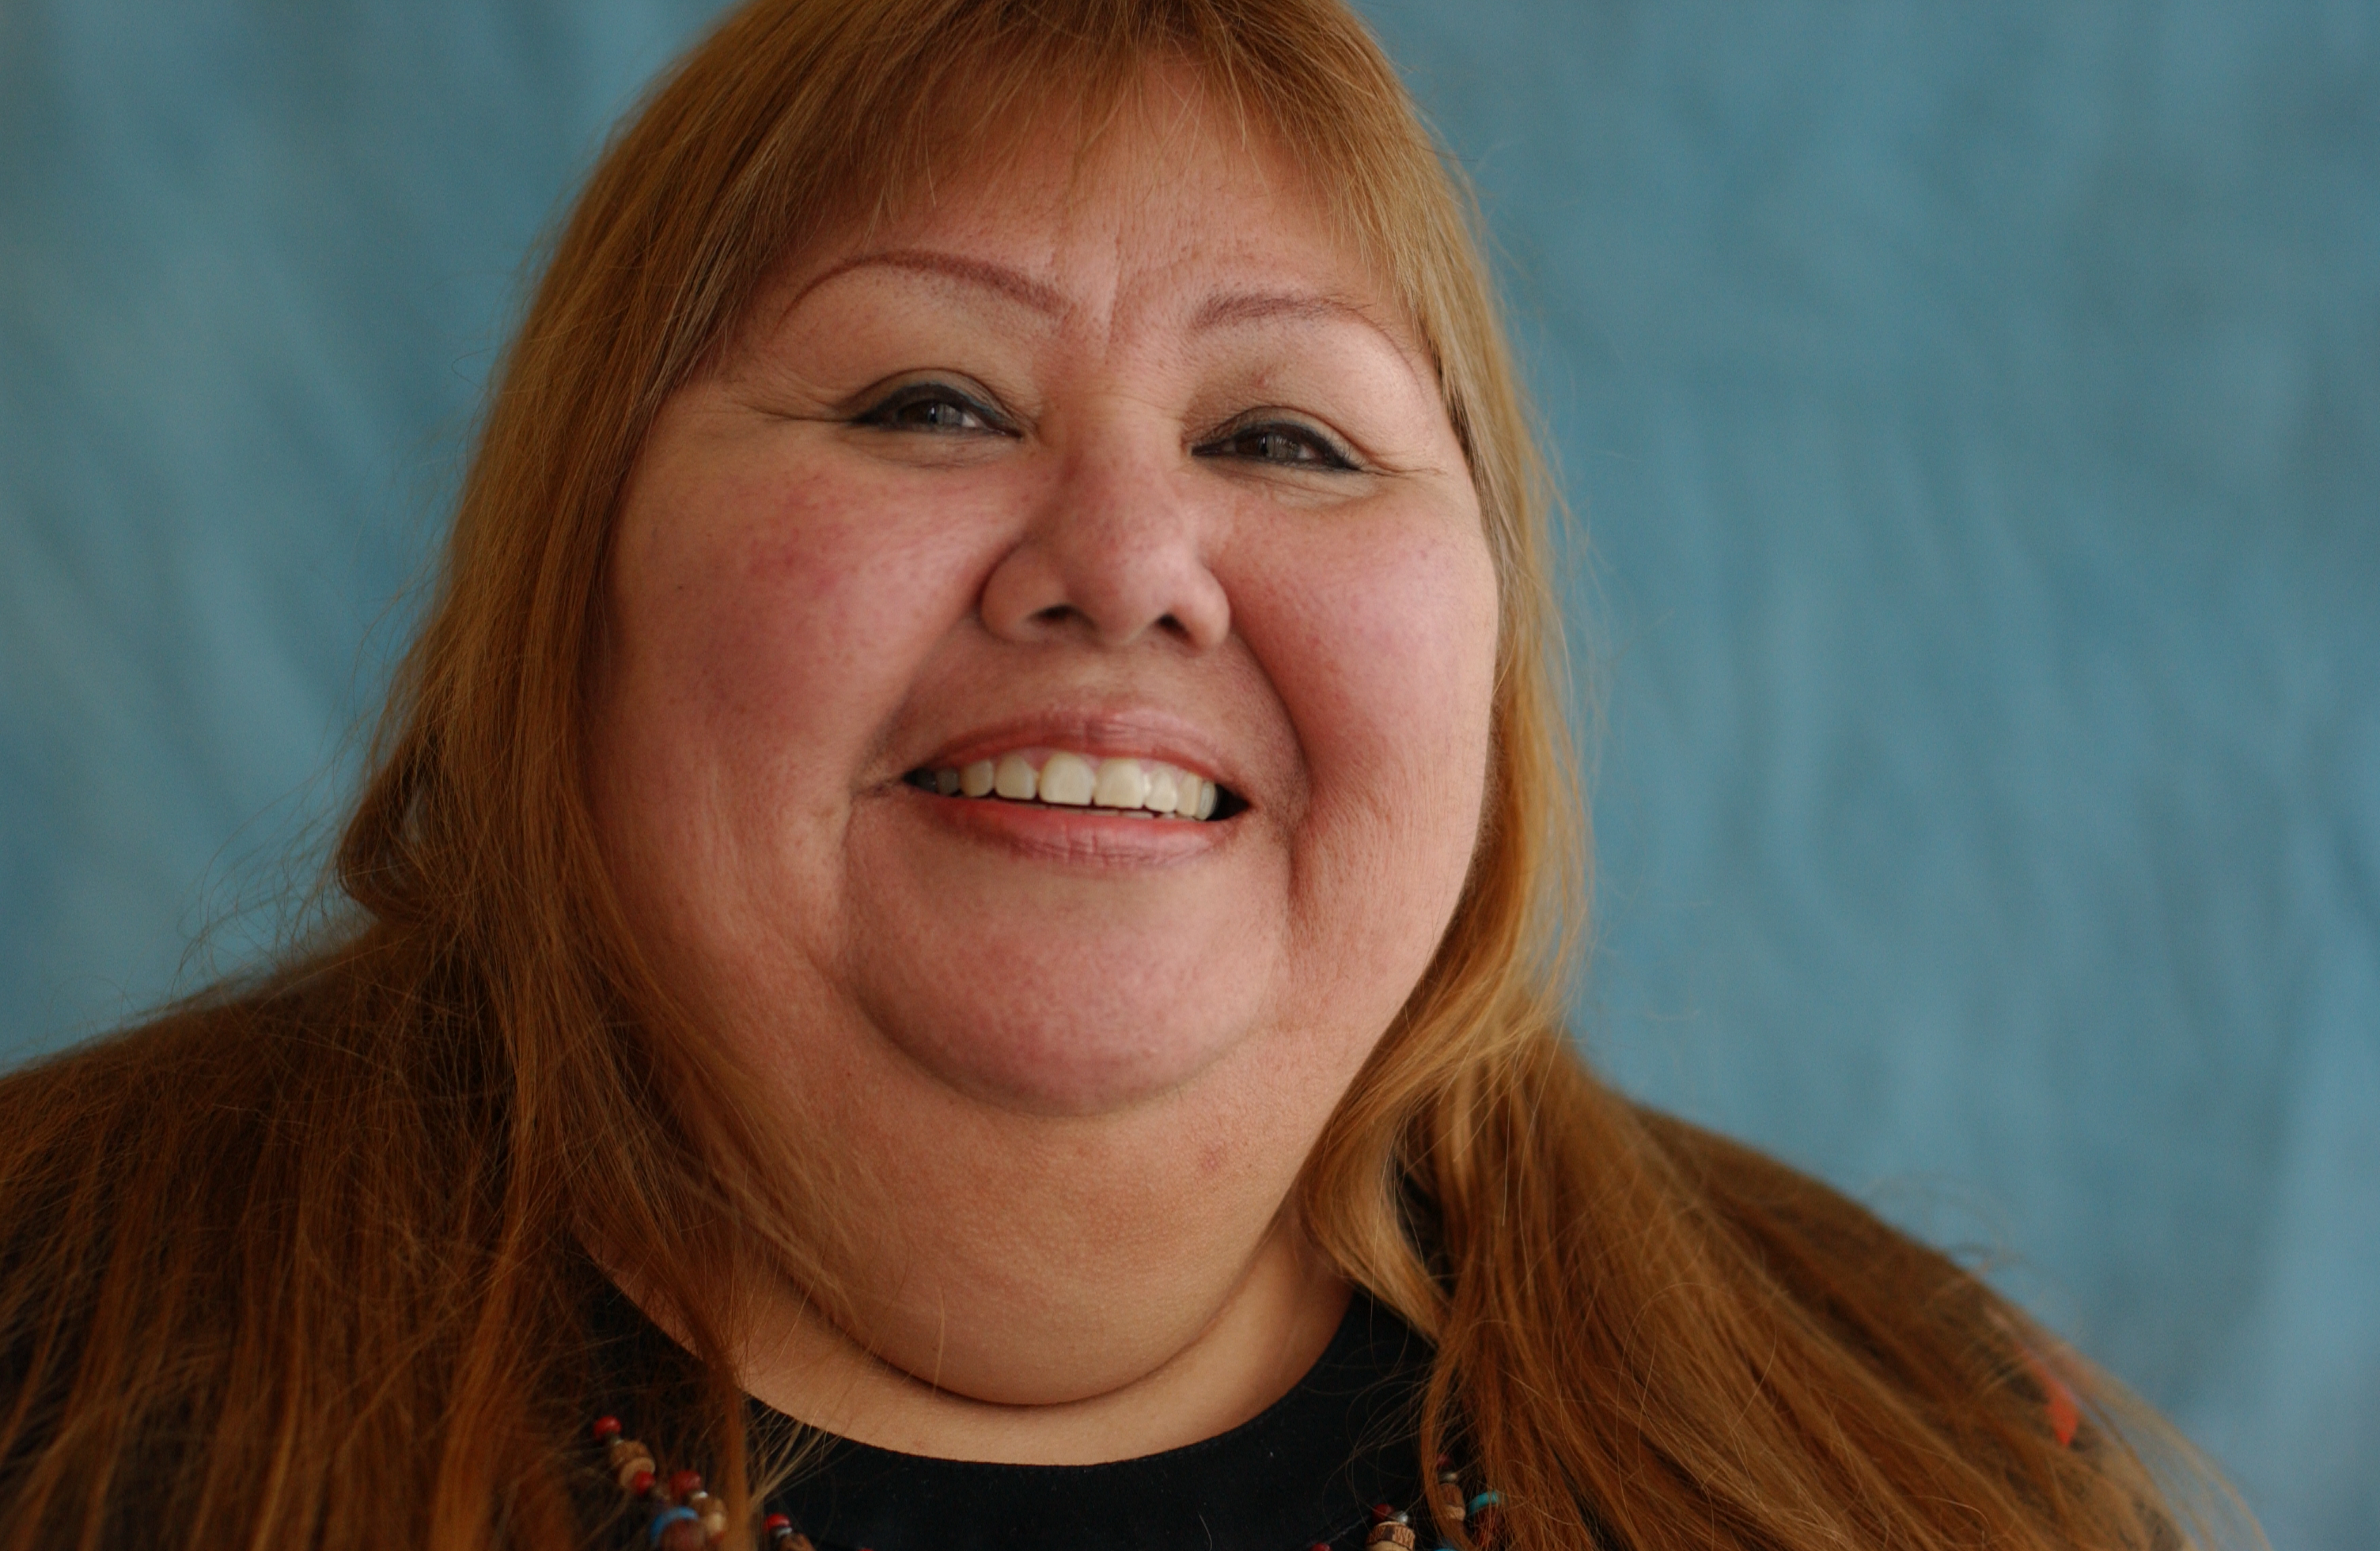 Rosanne Wyman, Upper Mohawk, Six Nations Indian Reserve, diagnosed 1987 with cervix cancer